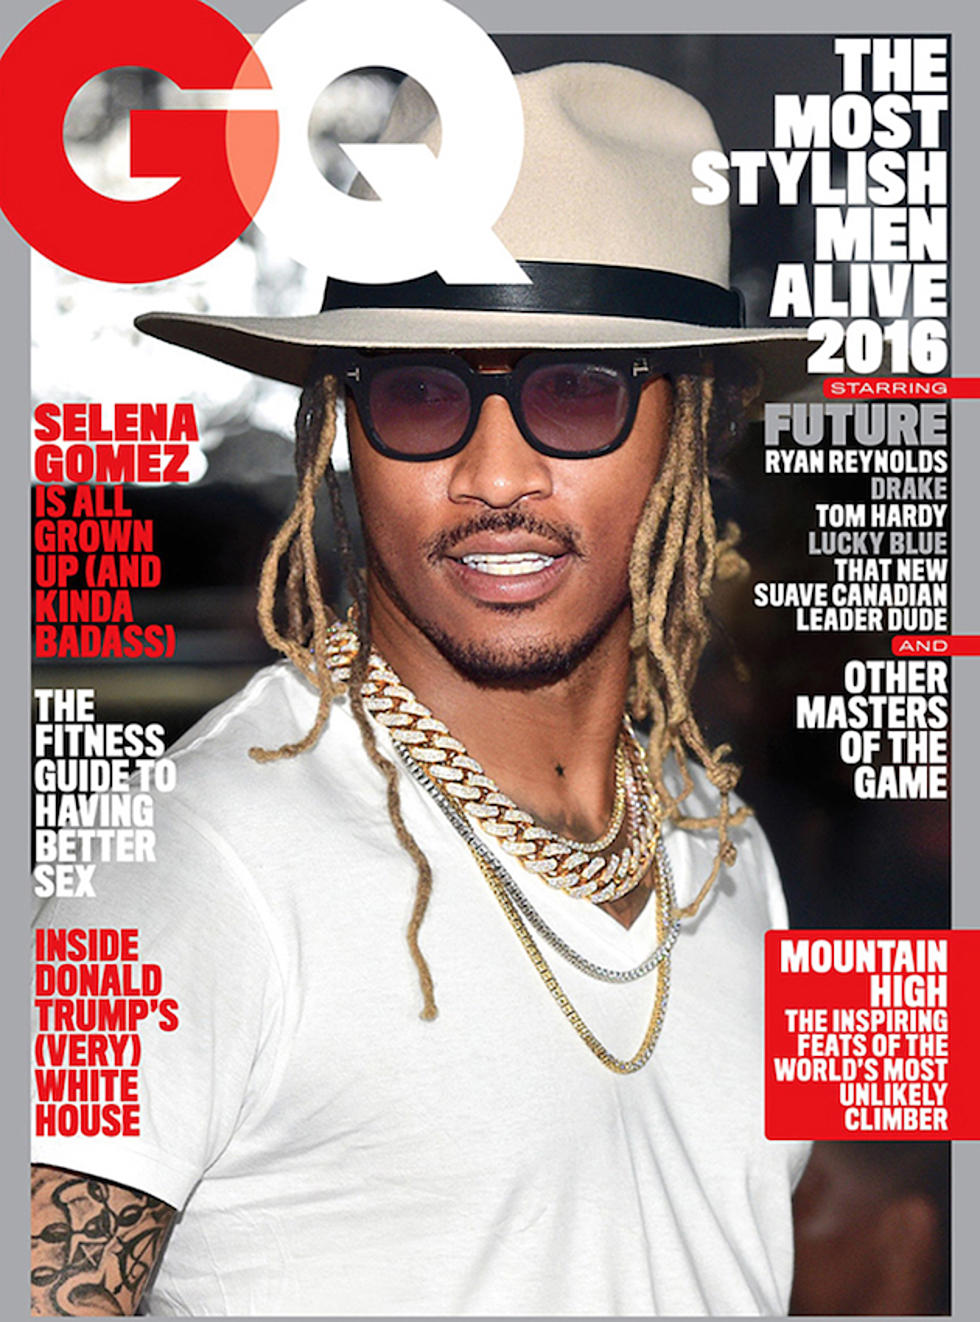 Future Lands GQ Cover As One of the 'Most Stylish Men Alive'